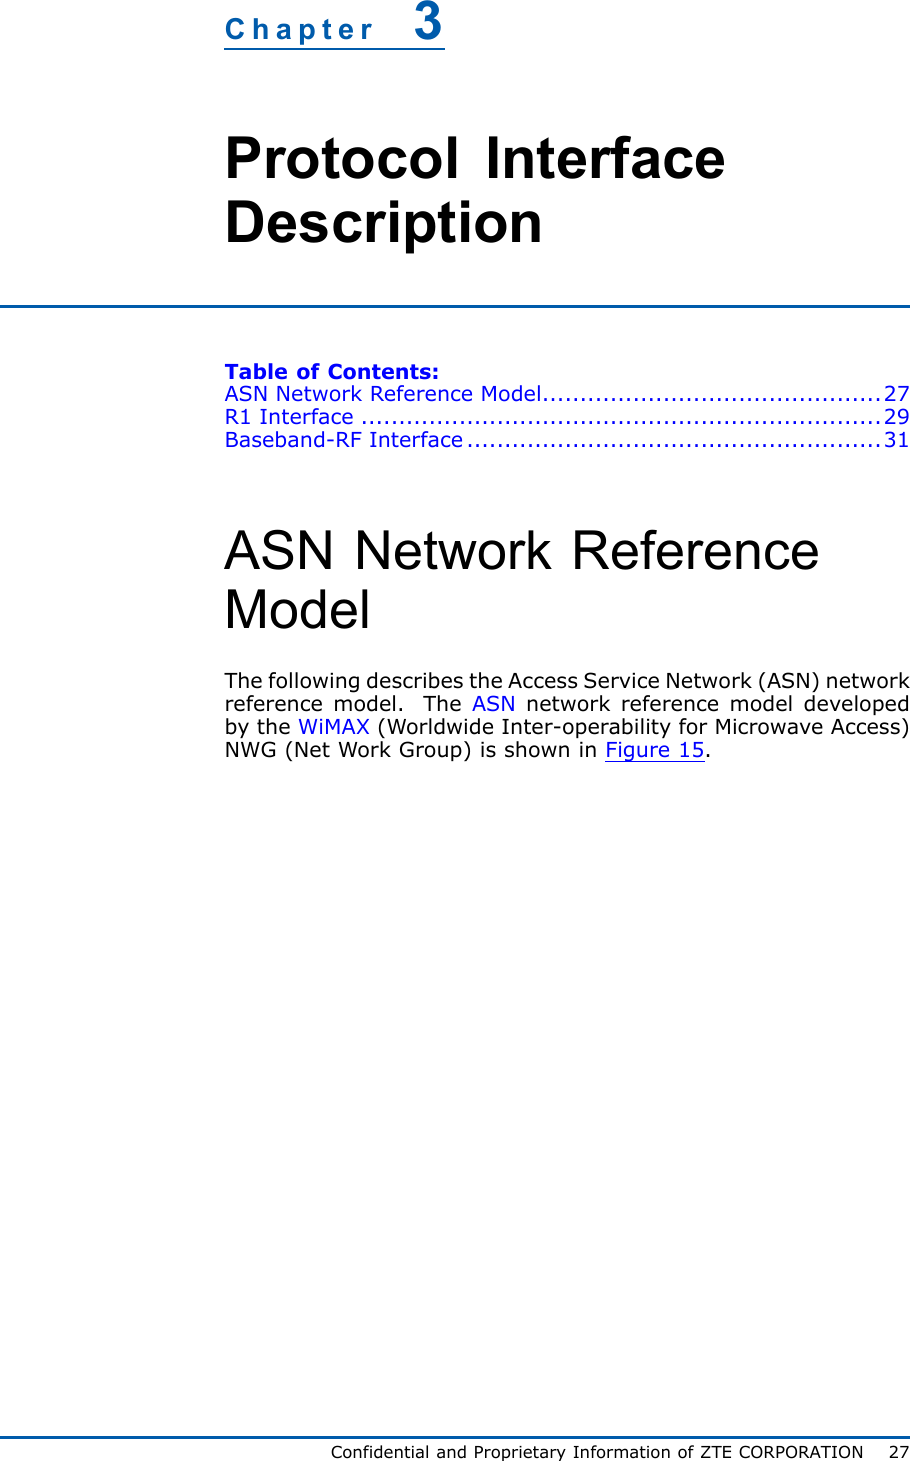 Chapter3ProtocolInterfaceDescriptionTableofContents:ASNNetworkReferenceModel.............................................27R1Interface.....................................................................29Baseband-RFInterface.......................................................31ASNNetworkReferenceModelThefollowingdescribestheAccessServiceNetwork(ASN)networkreferencemodel.TheASNnetworkreferencemodeldevelopedbytheWiMAX(WorldwideInter-operabilityforMicrowaveAccess)NWG(NetWorkGroup)isshowninFigure15.ConfidentialandProprietaryInformationofZTECORPORATION27